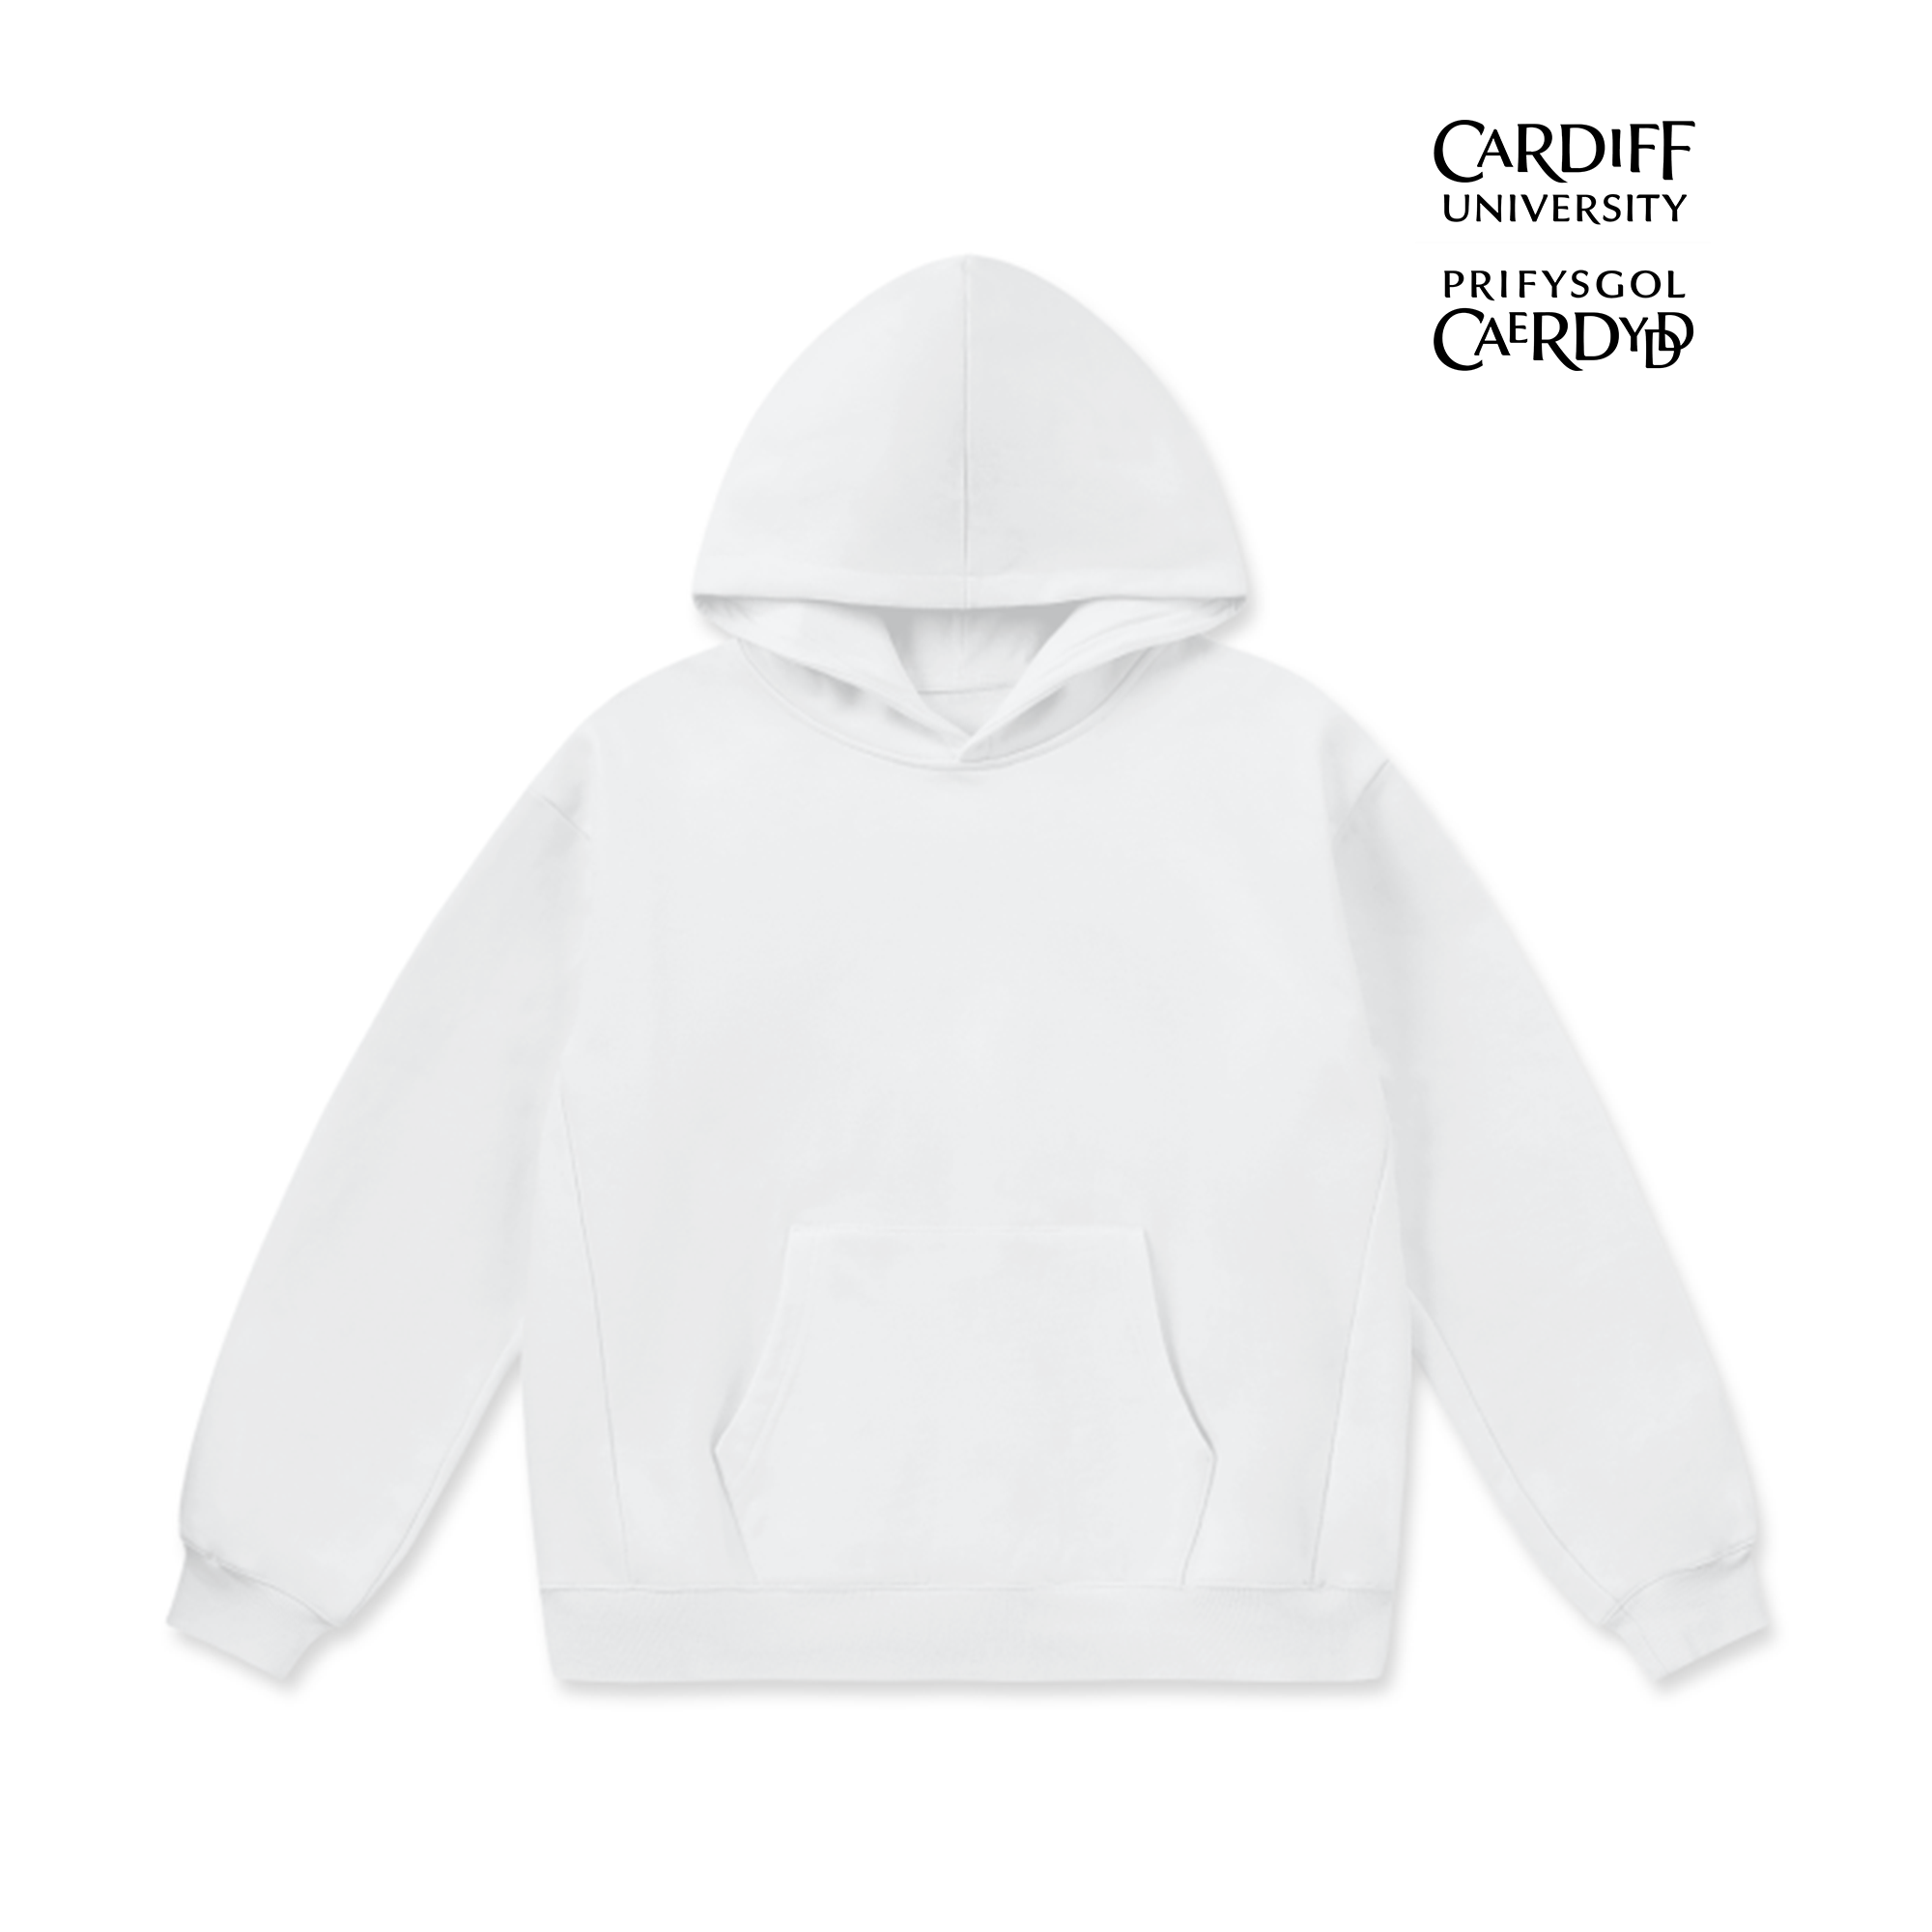 LCC Super Weighted Hoodie - Cardiff University (Modern Ver.1)